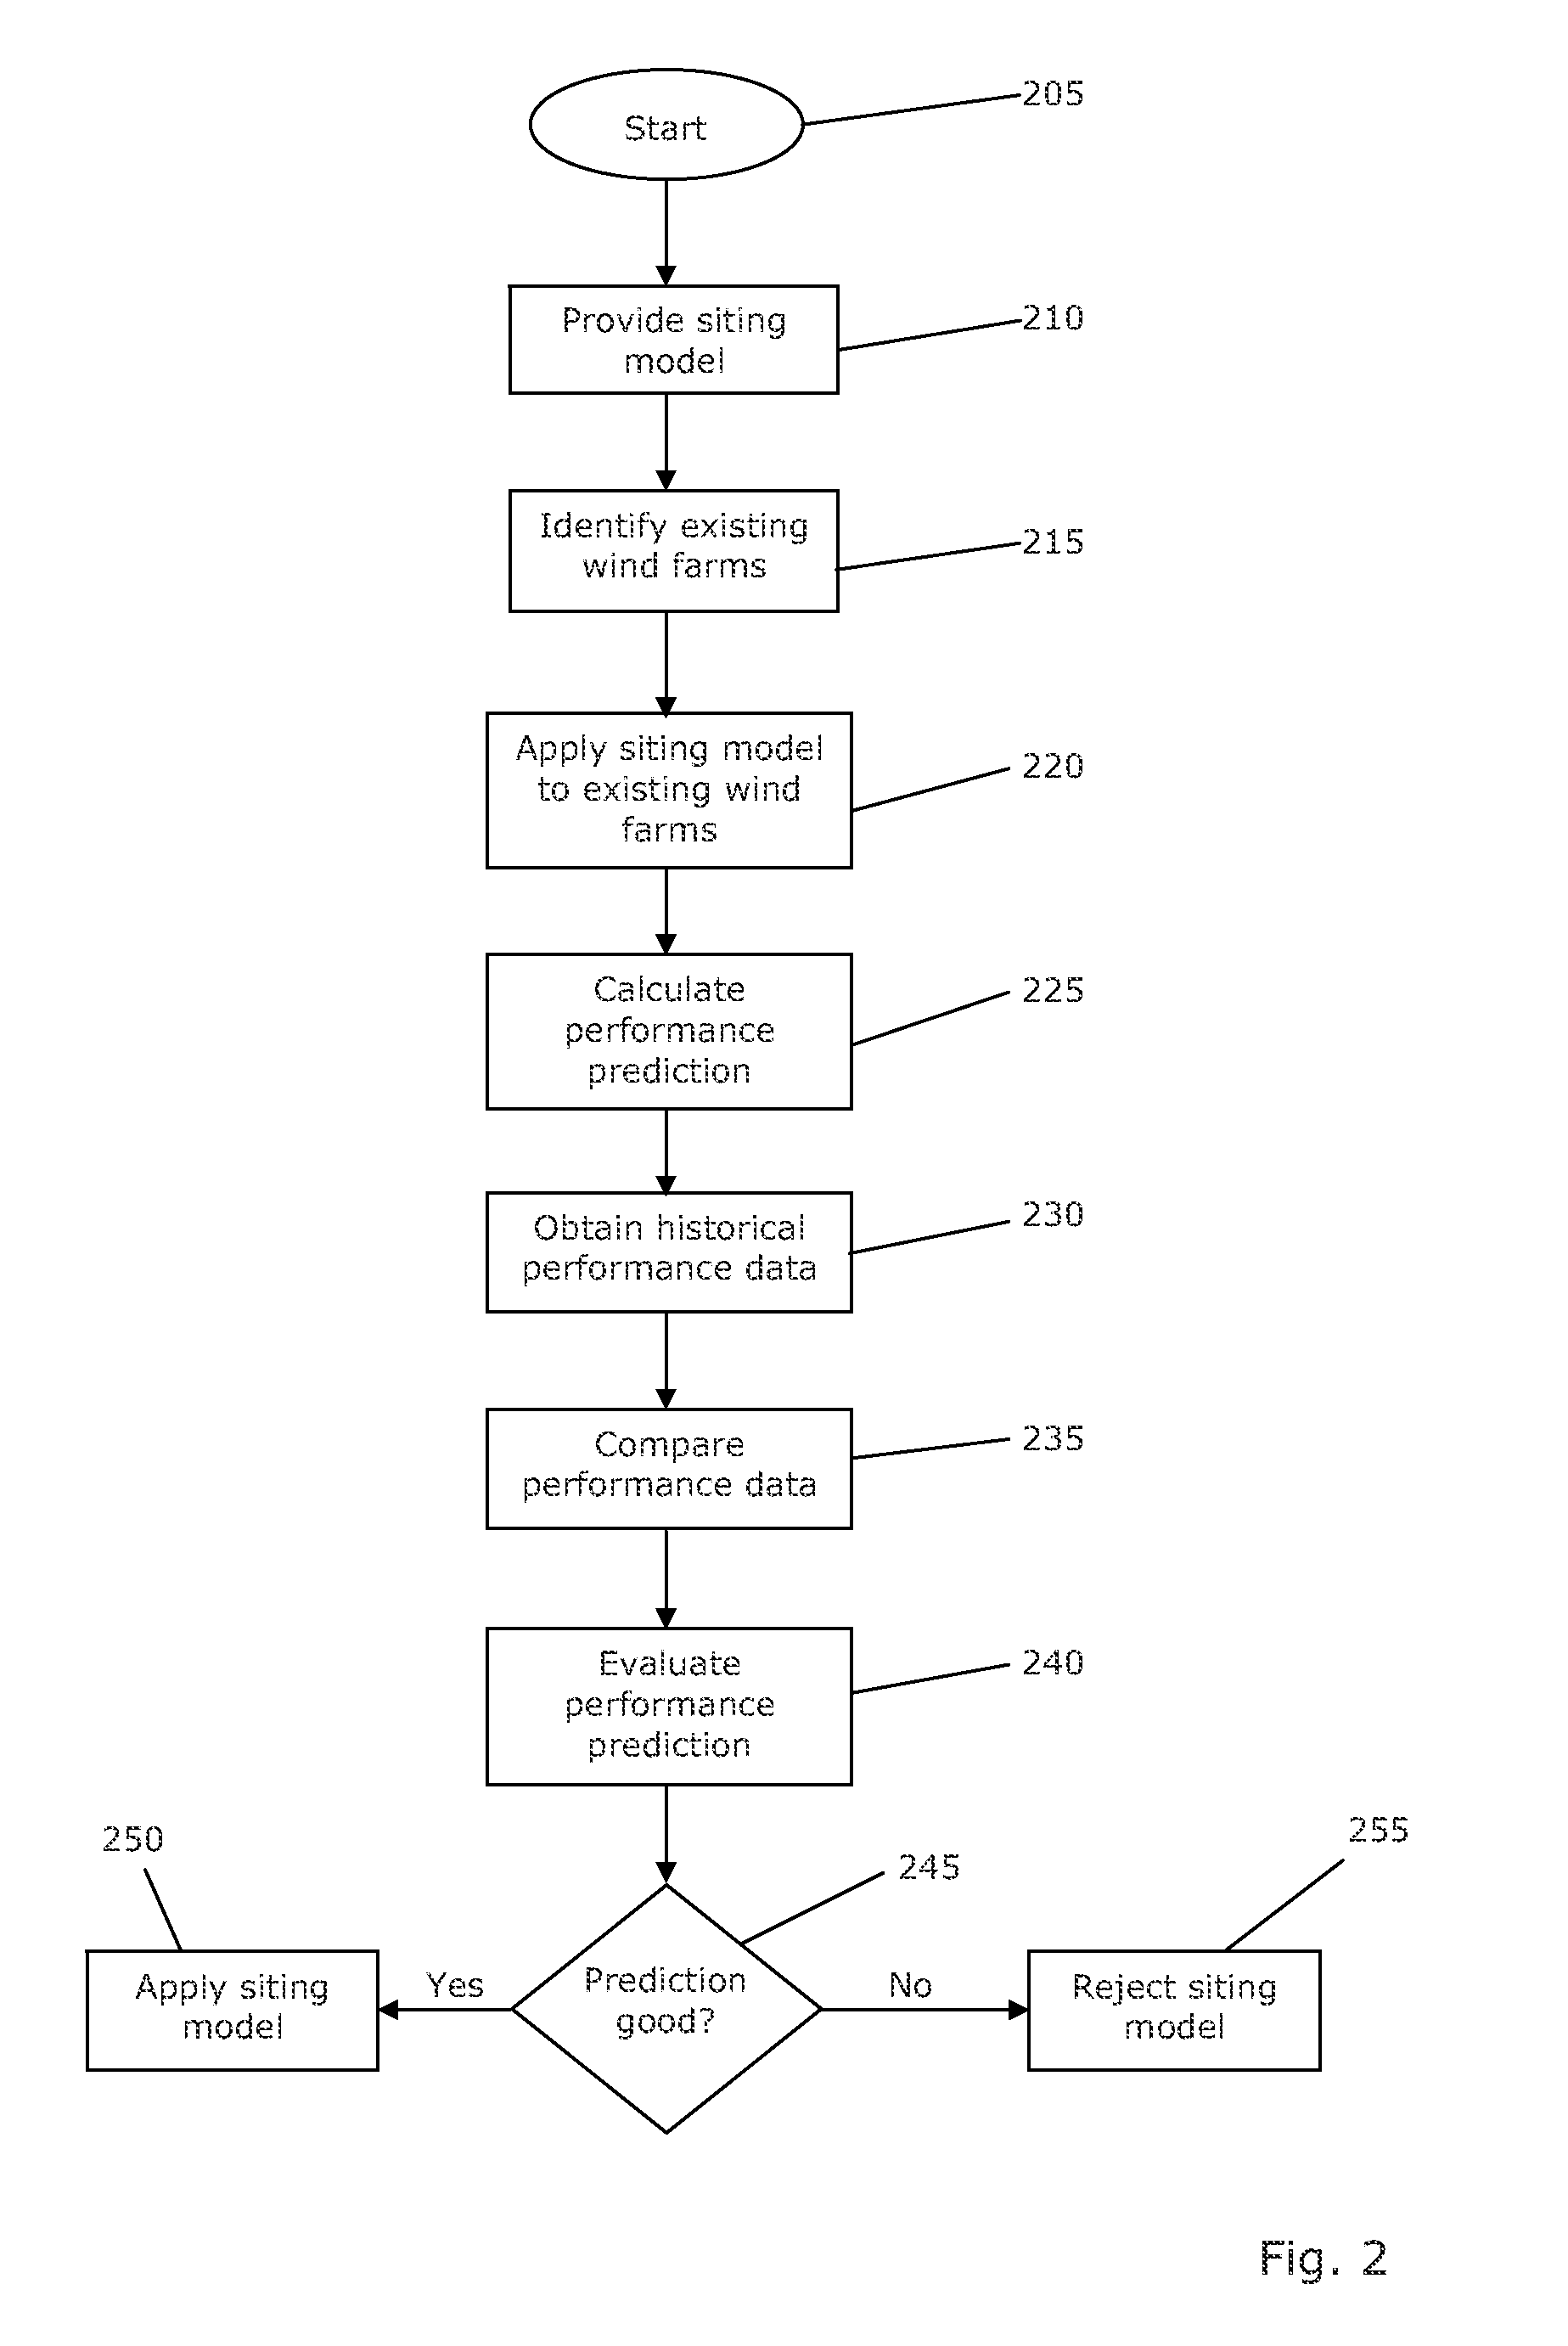 Method for evaluating a performance prediction for a wind farm